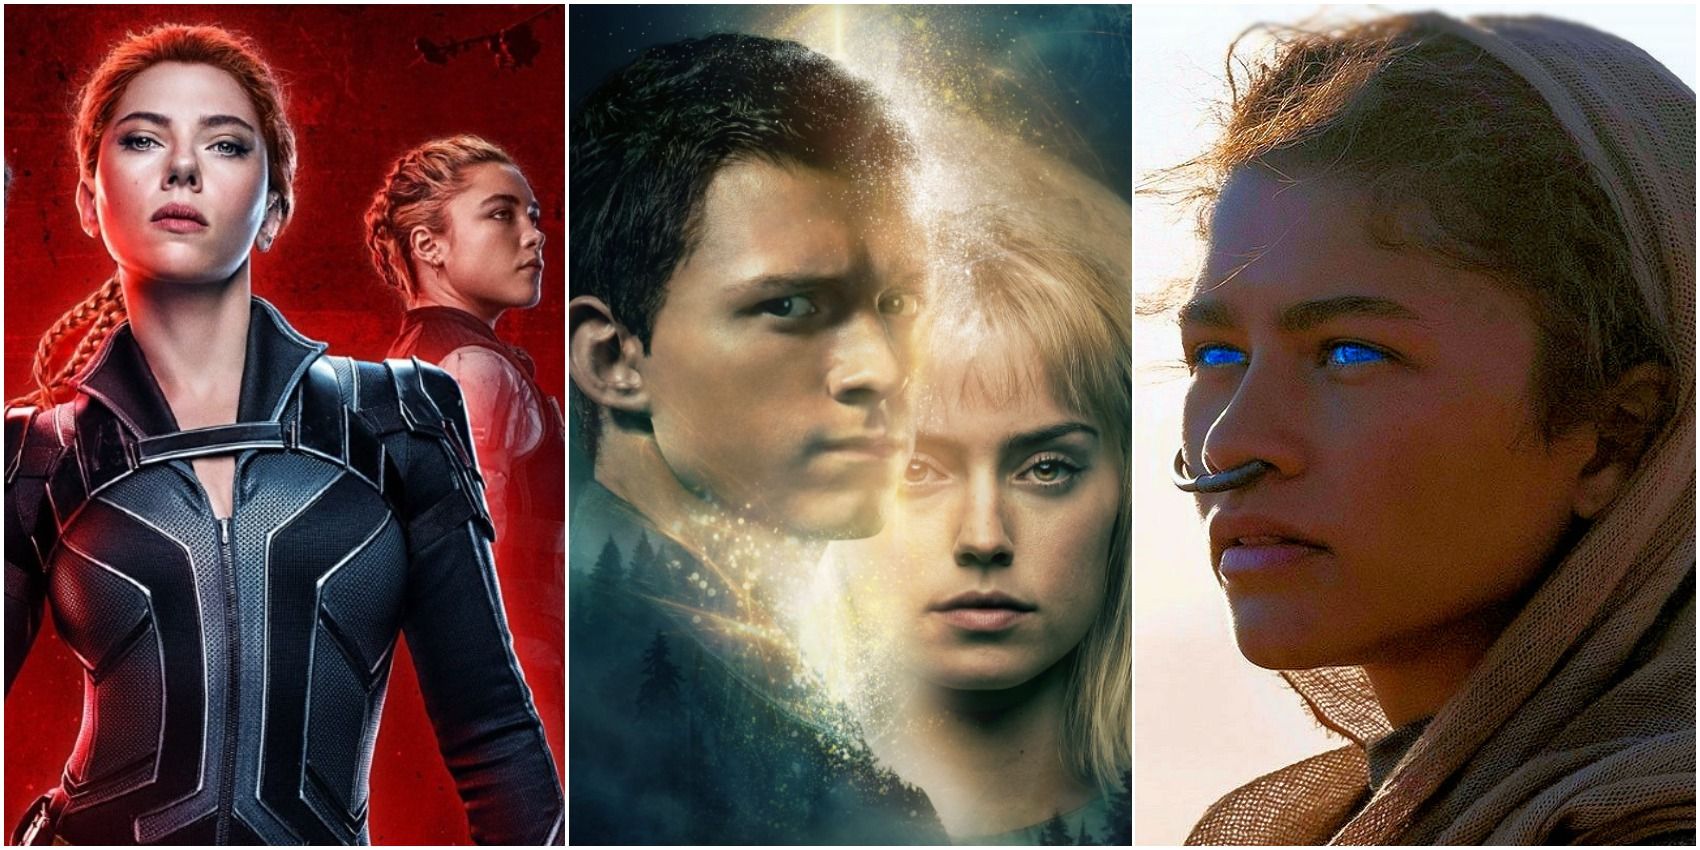 The 10 MostAnticipated SciFi Movies Of 2021 (According To Their IMDb